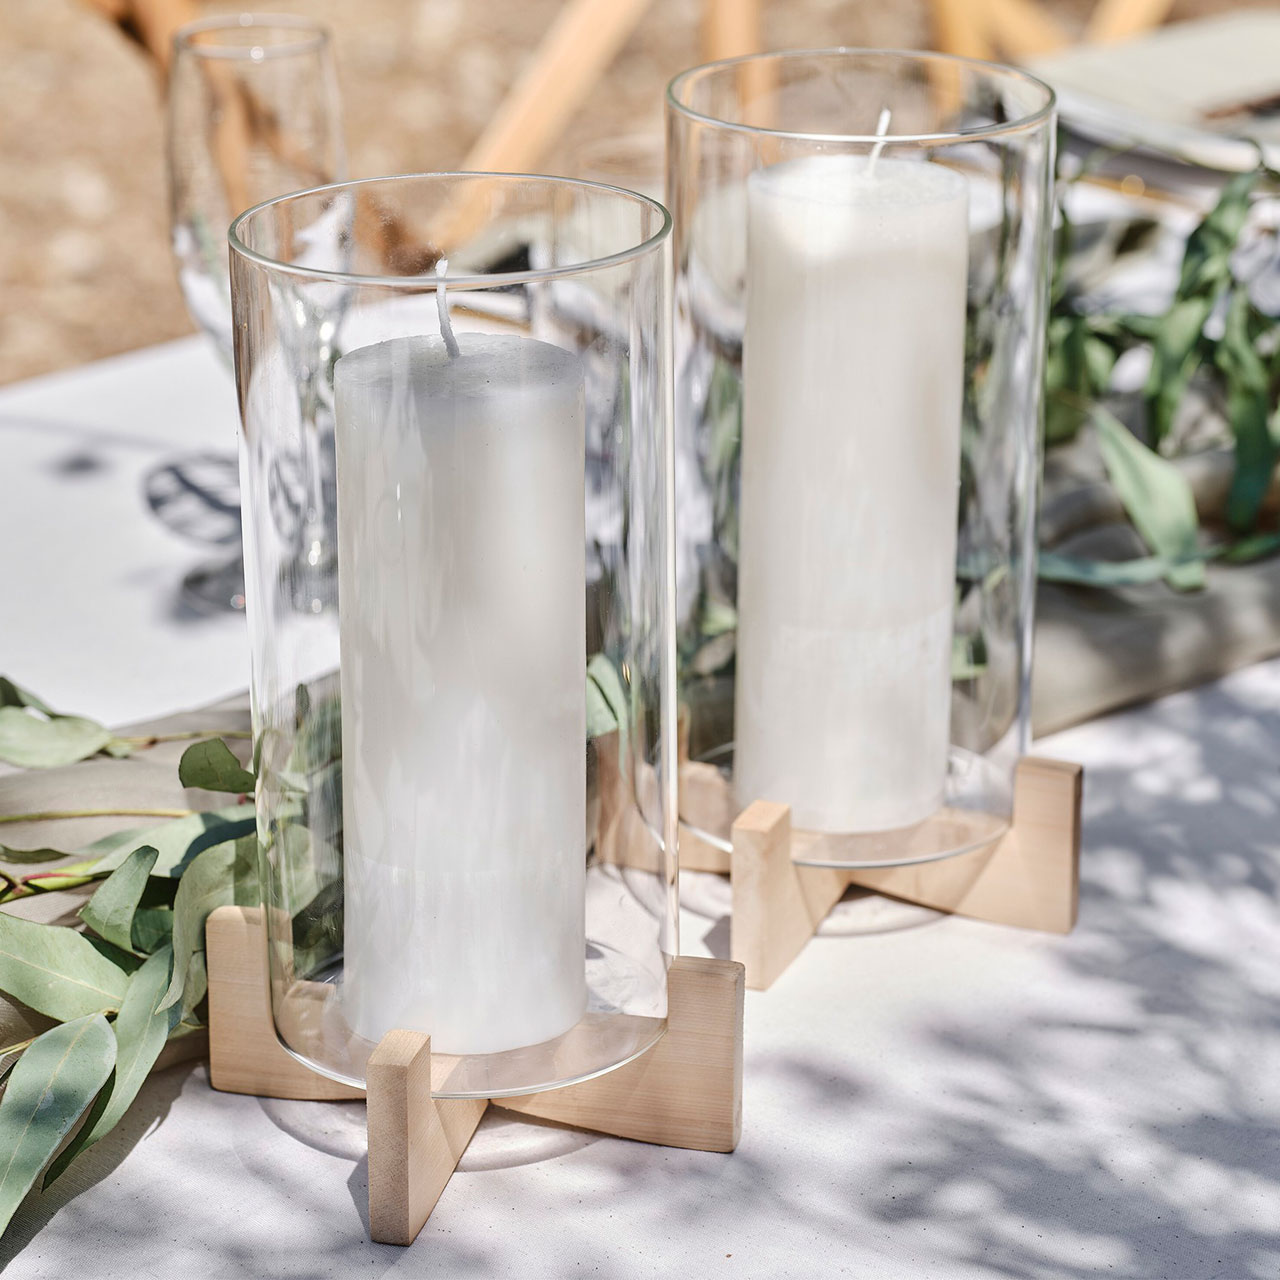 Candle Accessories - Glass & Wood Candle Holder